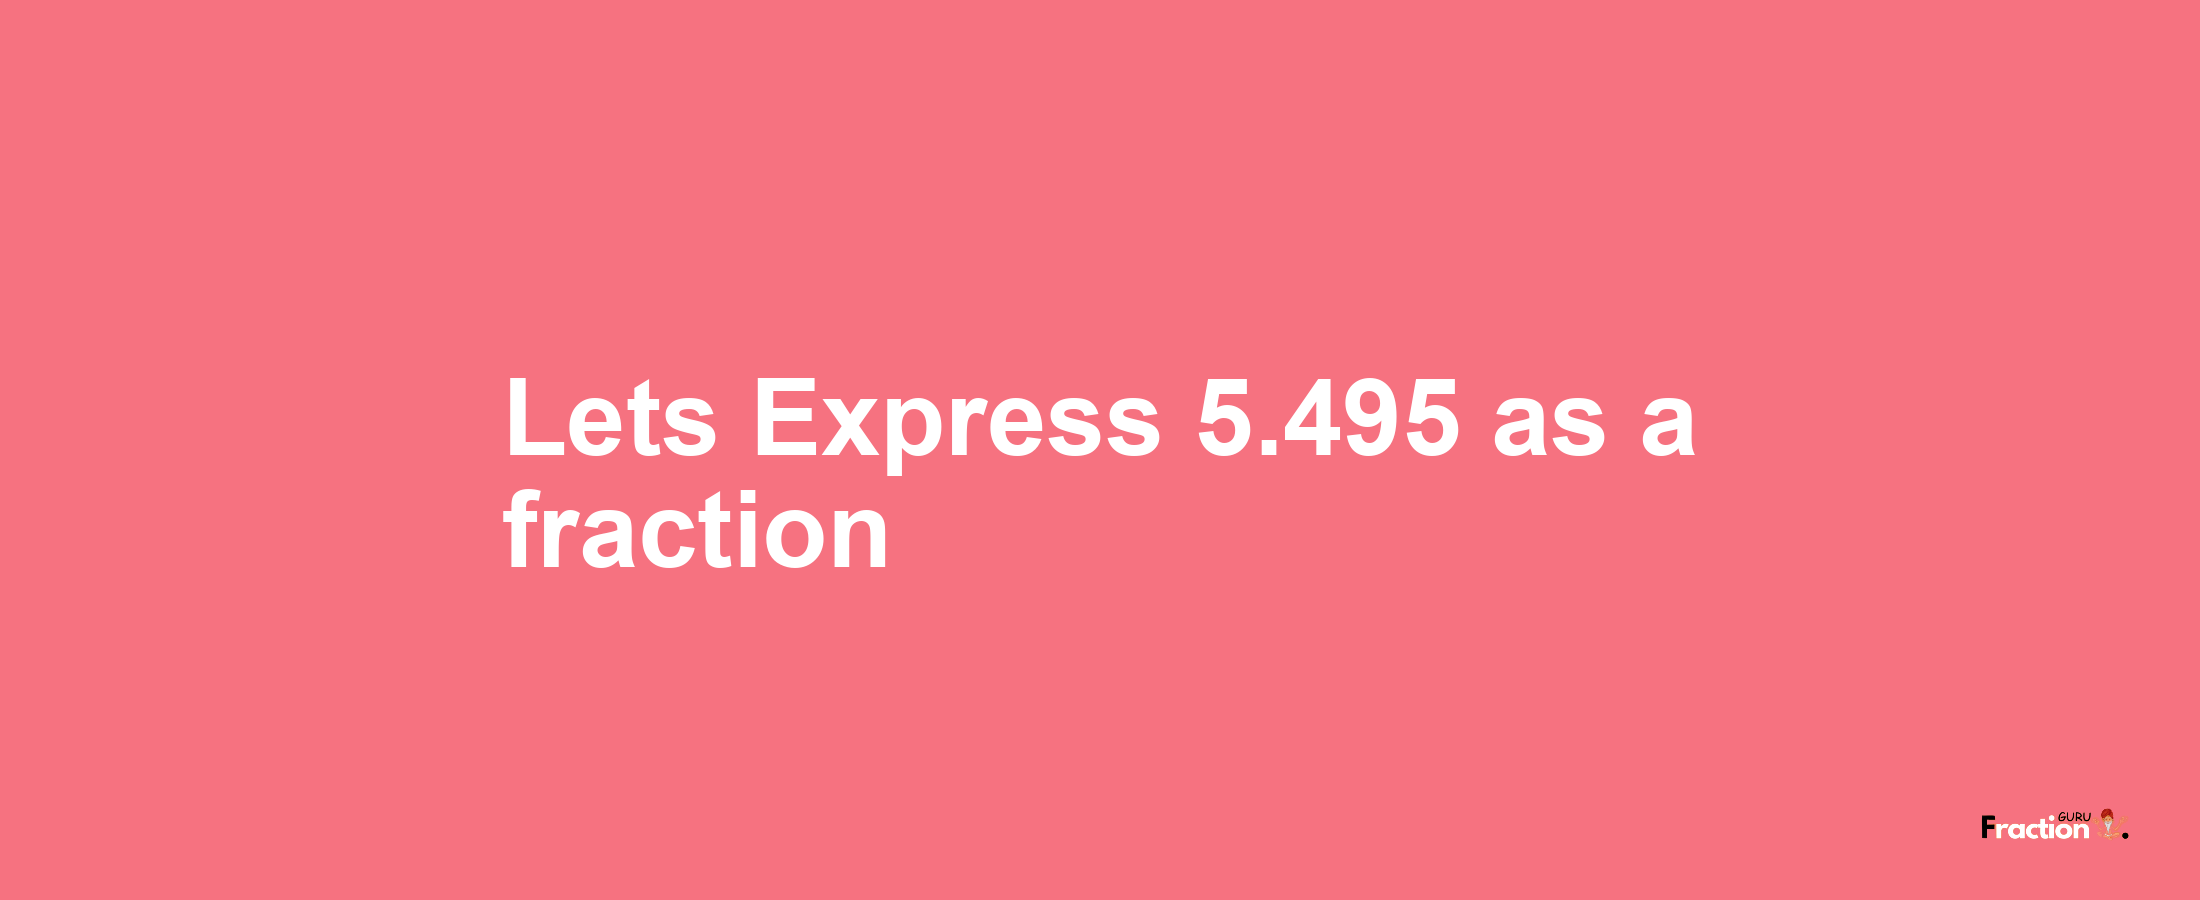 Lets Express 5.495 as afraction